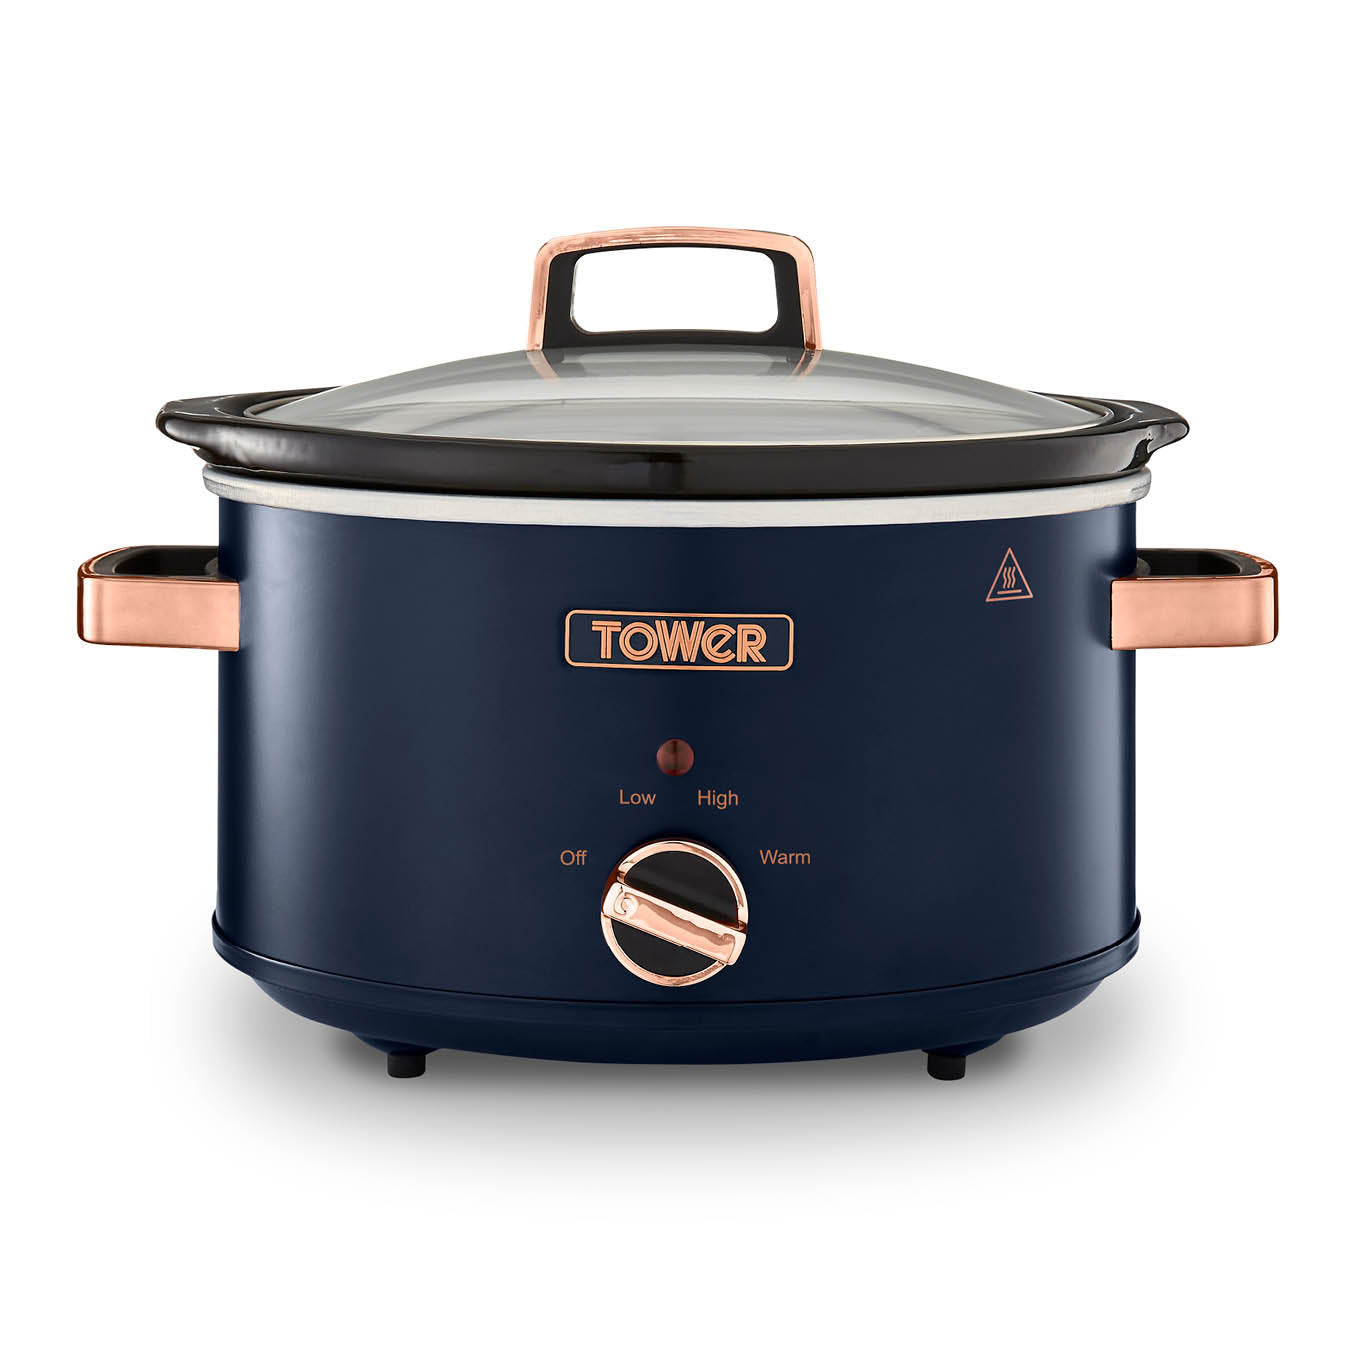 Tower Cavaletto 3.5 Litre Slow Cooker - Midnight Blue  | TJ Hughes